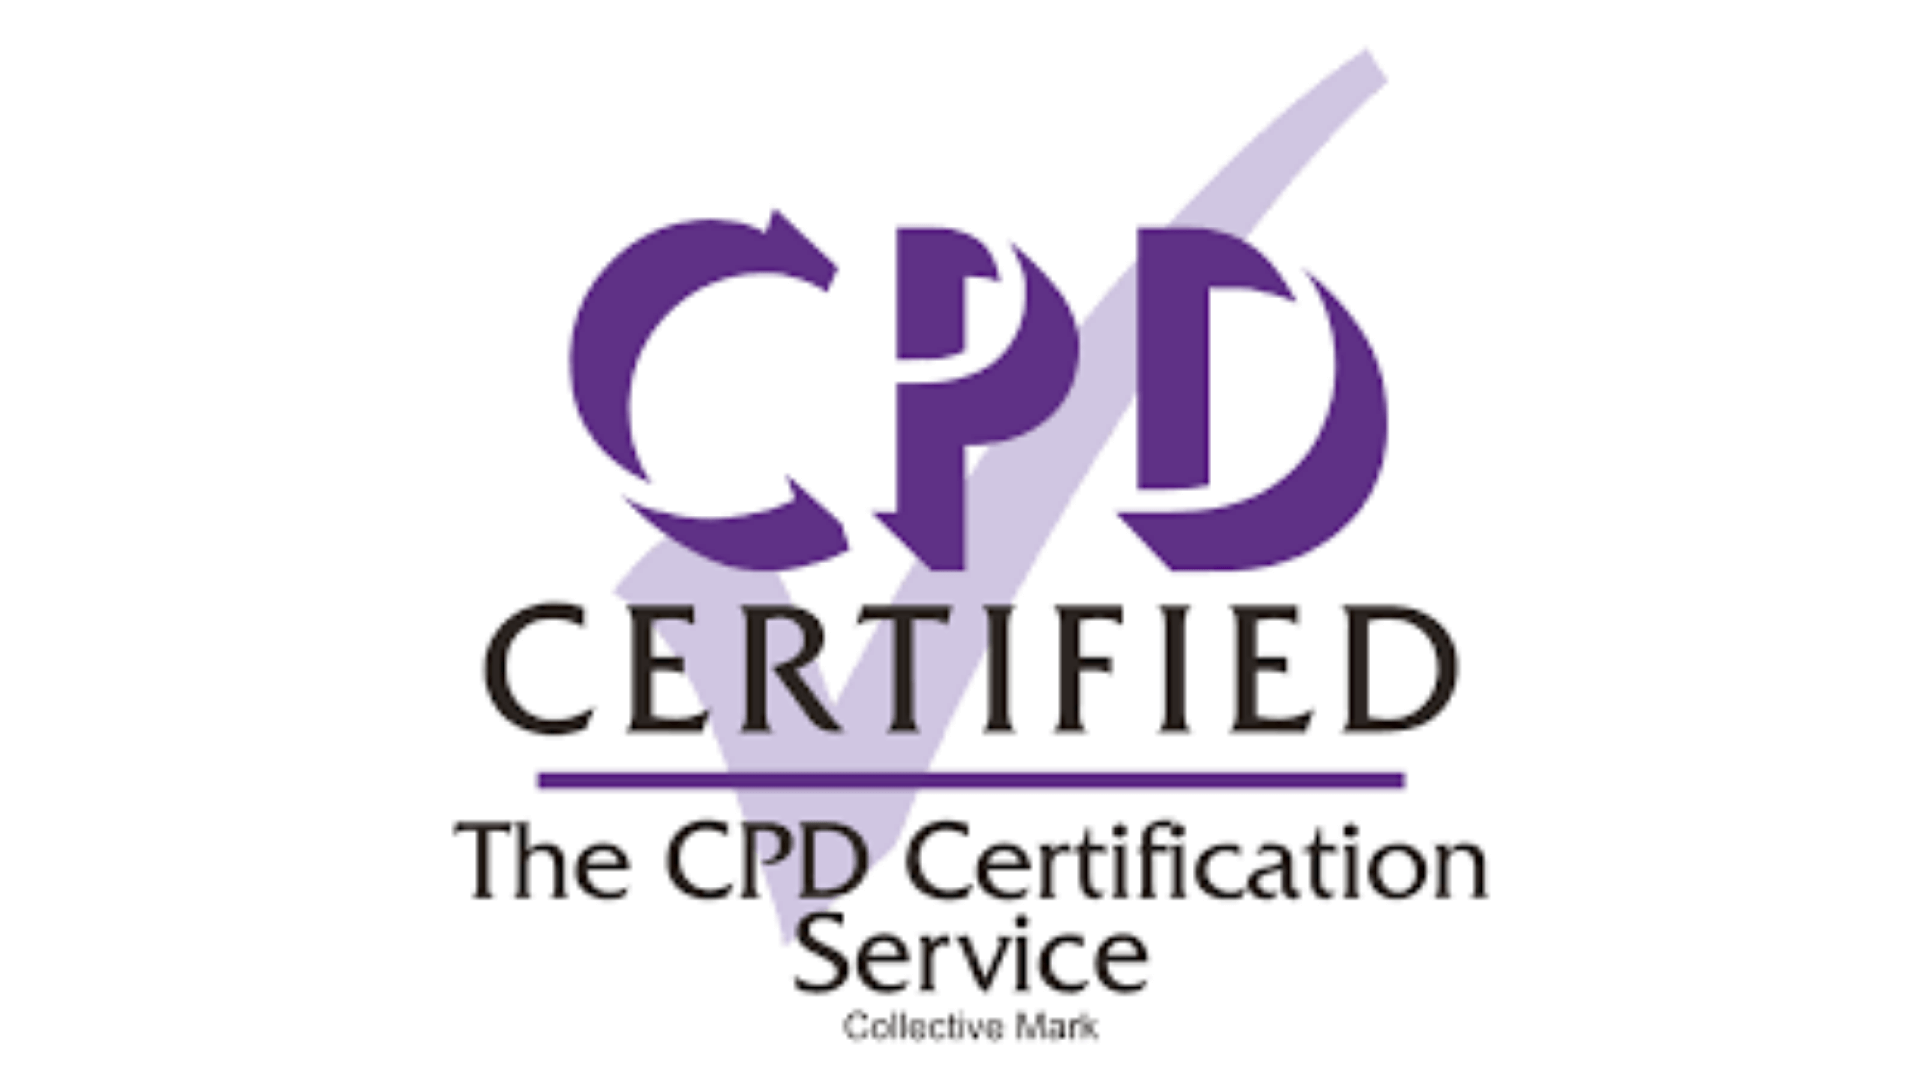 accelerate sport accreditation partners logos CPD service